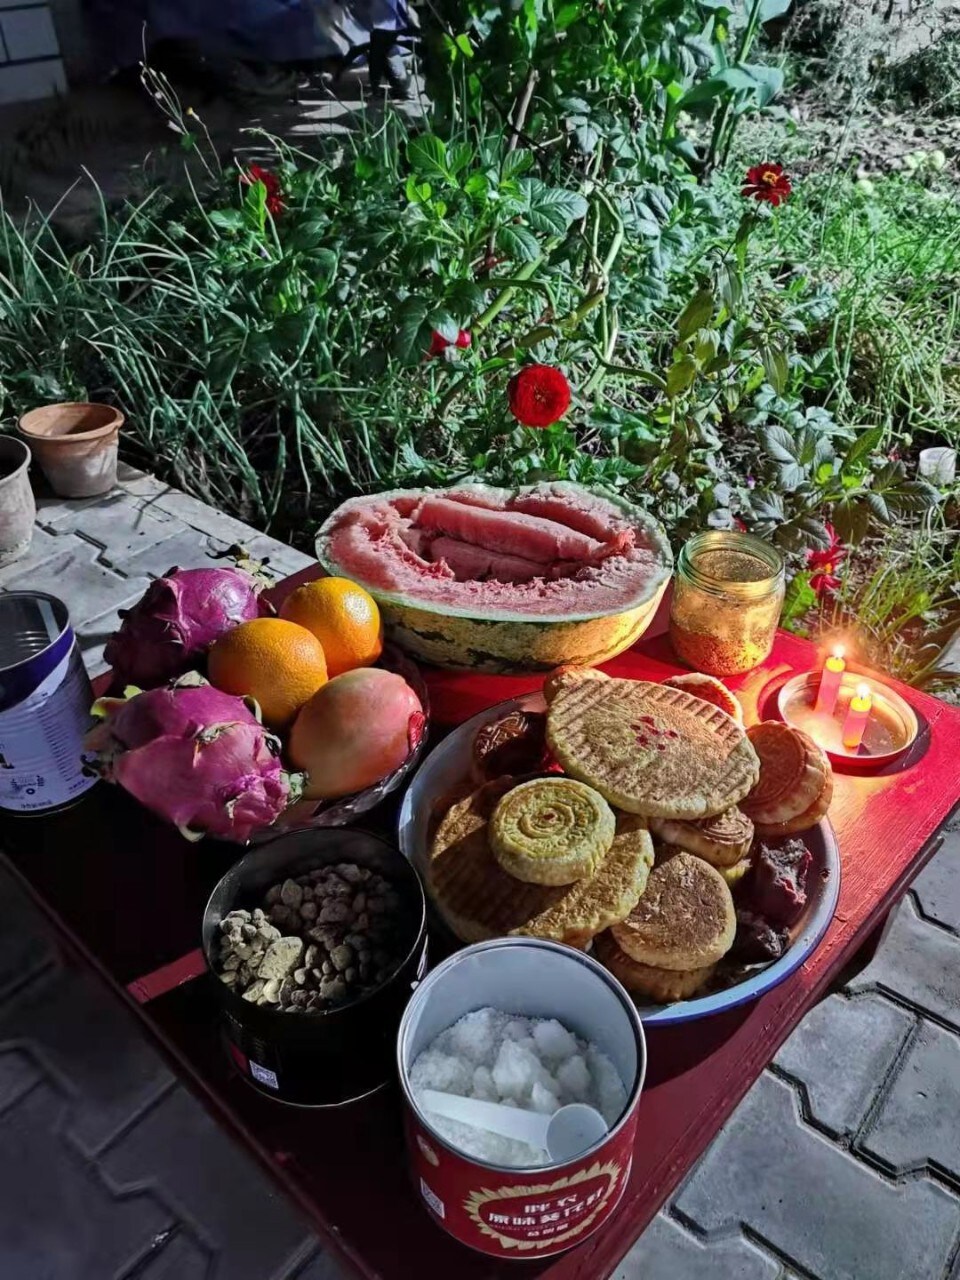 Table of food, fruits, mooncakes, candles, outside in a yard